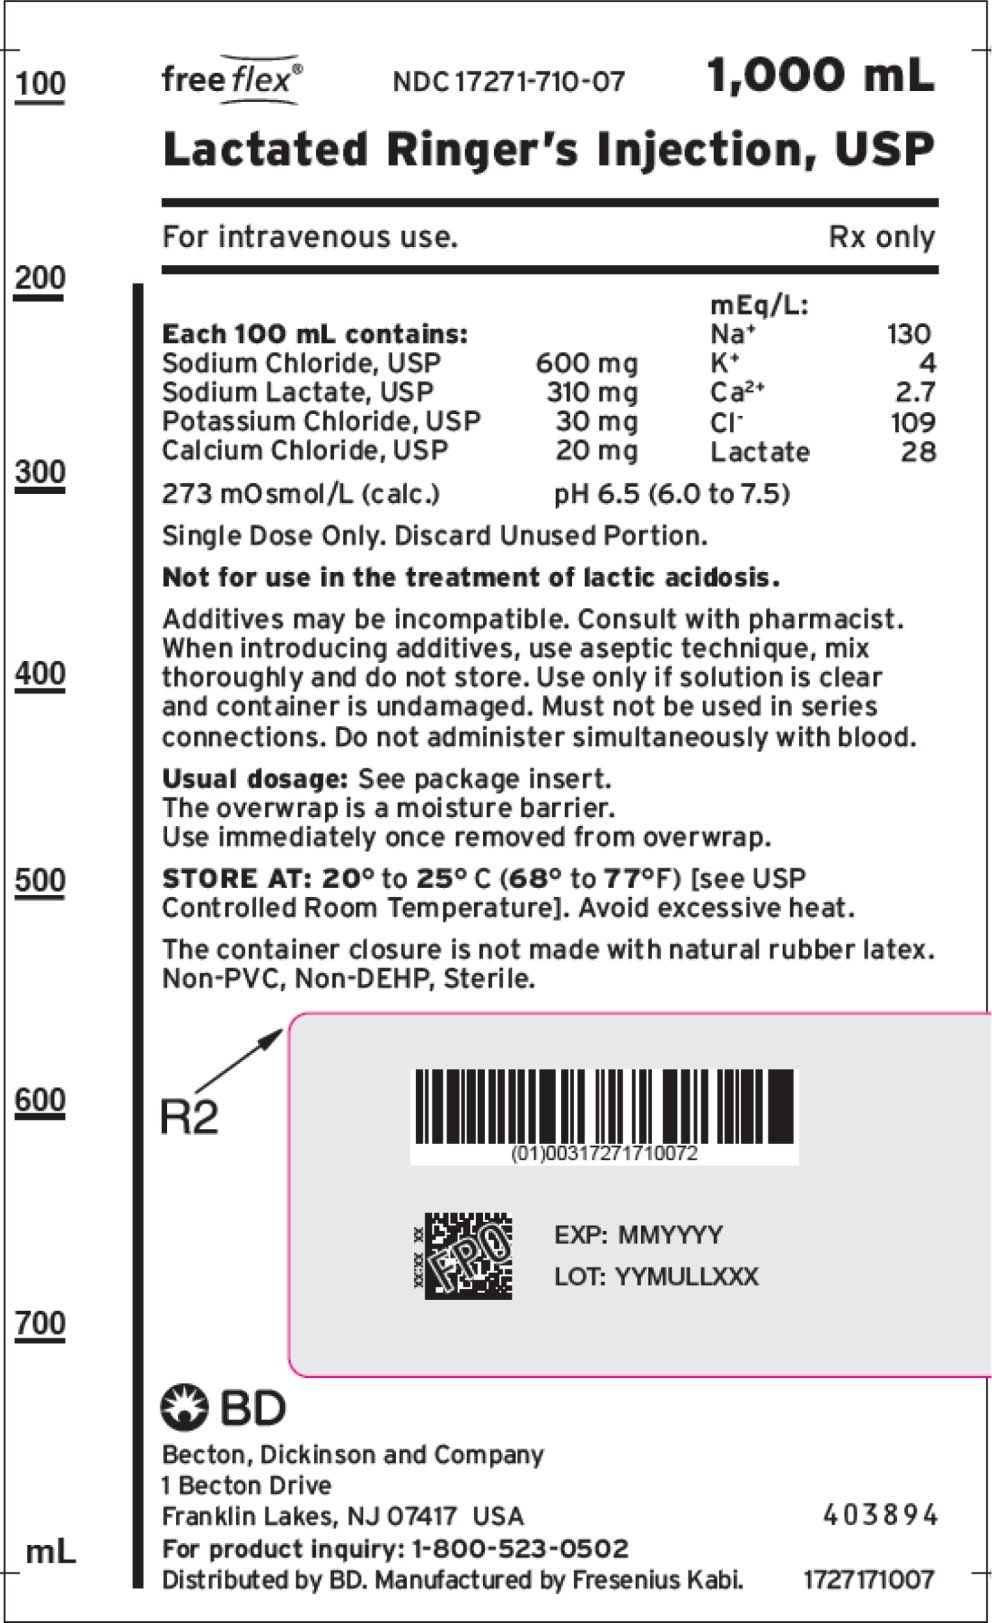 PACKAGE LABEL – PRINCIPAL DISPLAY – Lactated Ringer's Injection, USP 1000 mL Bag
